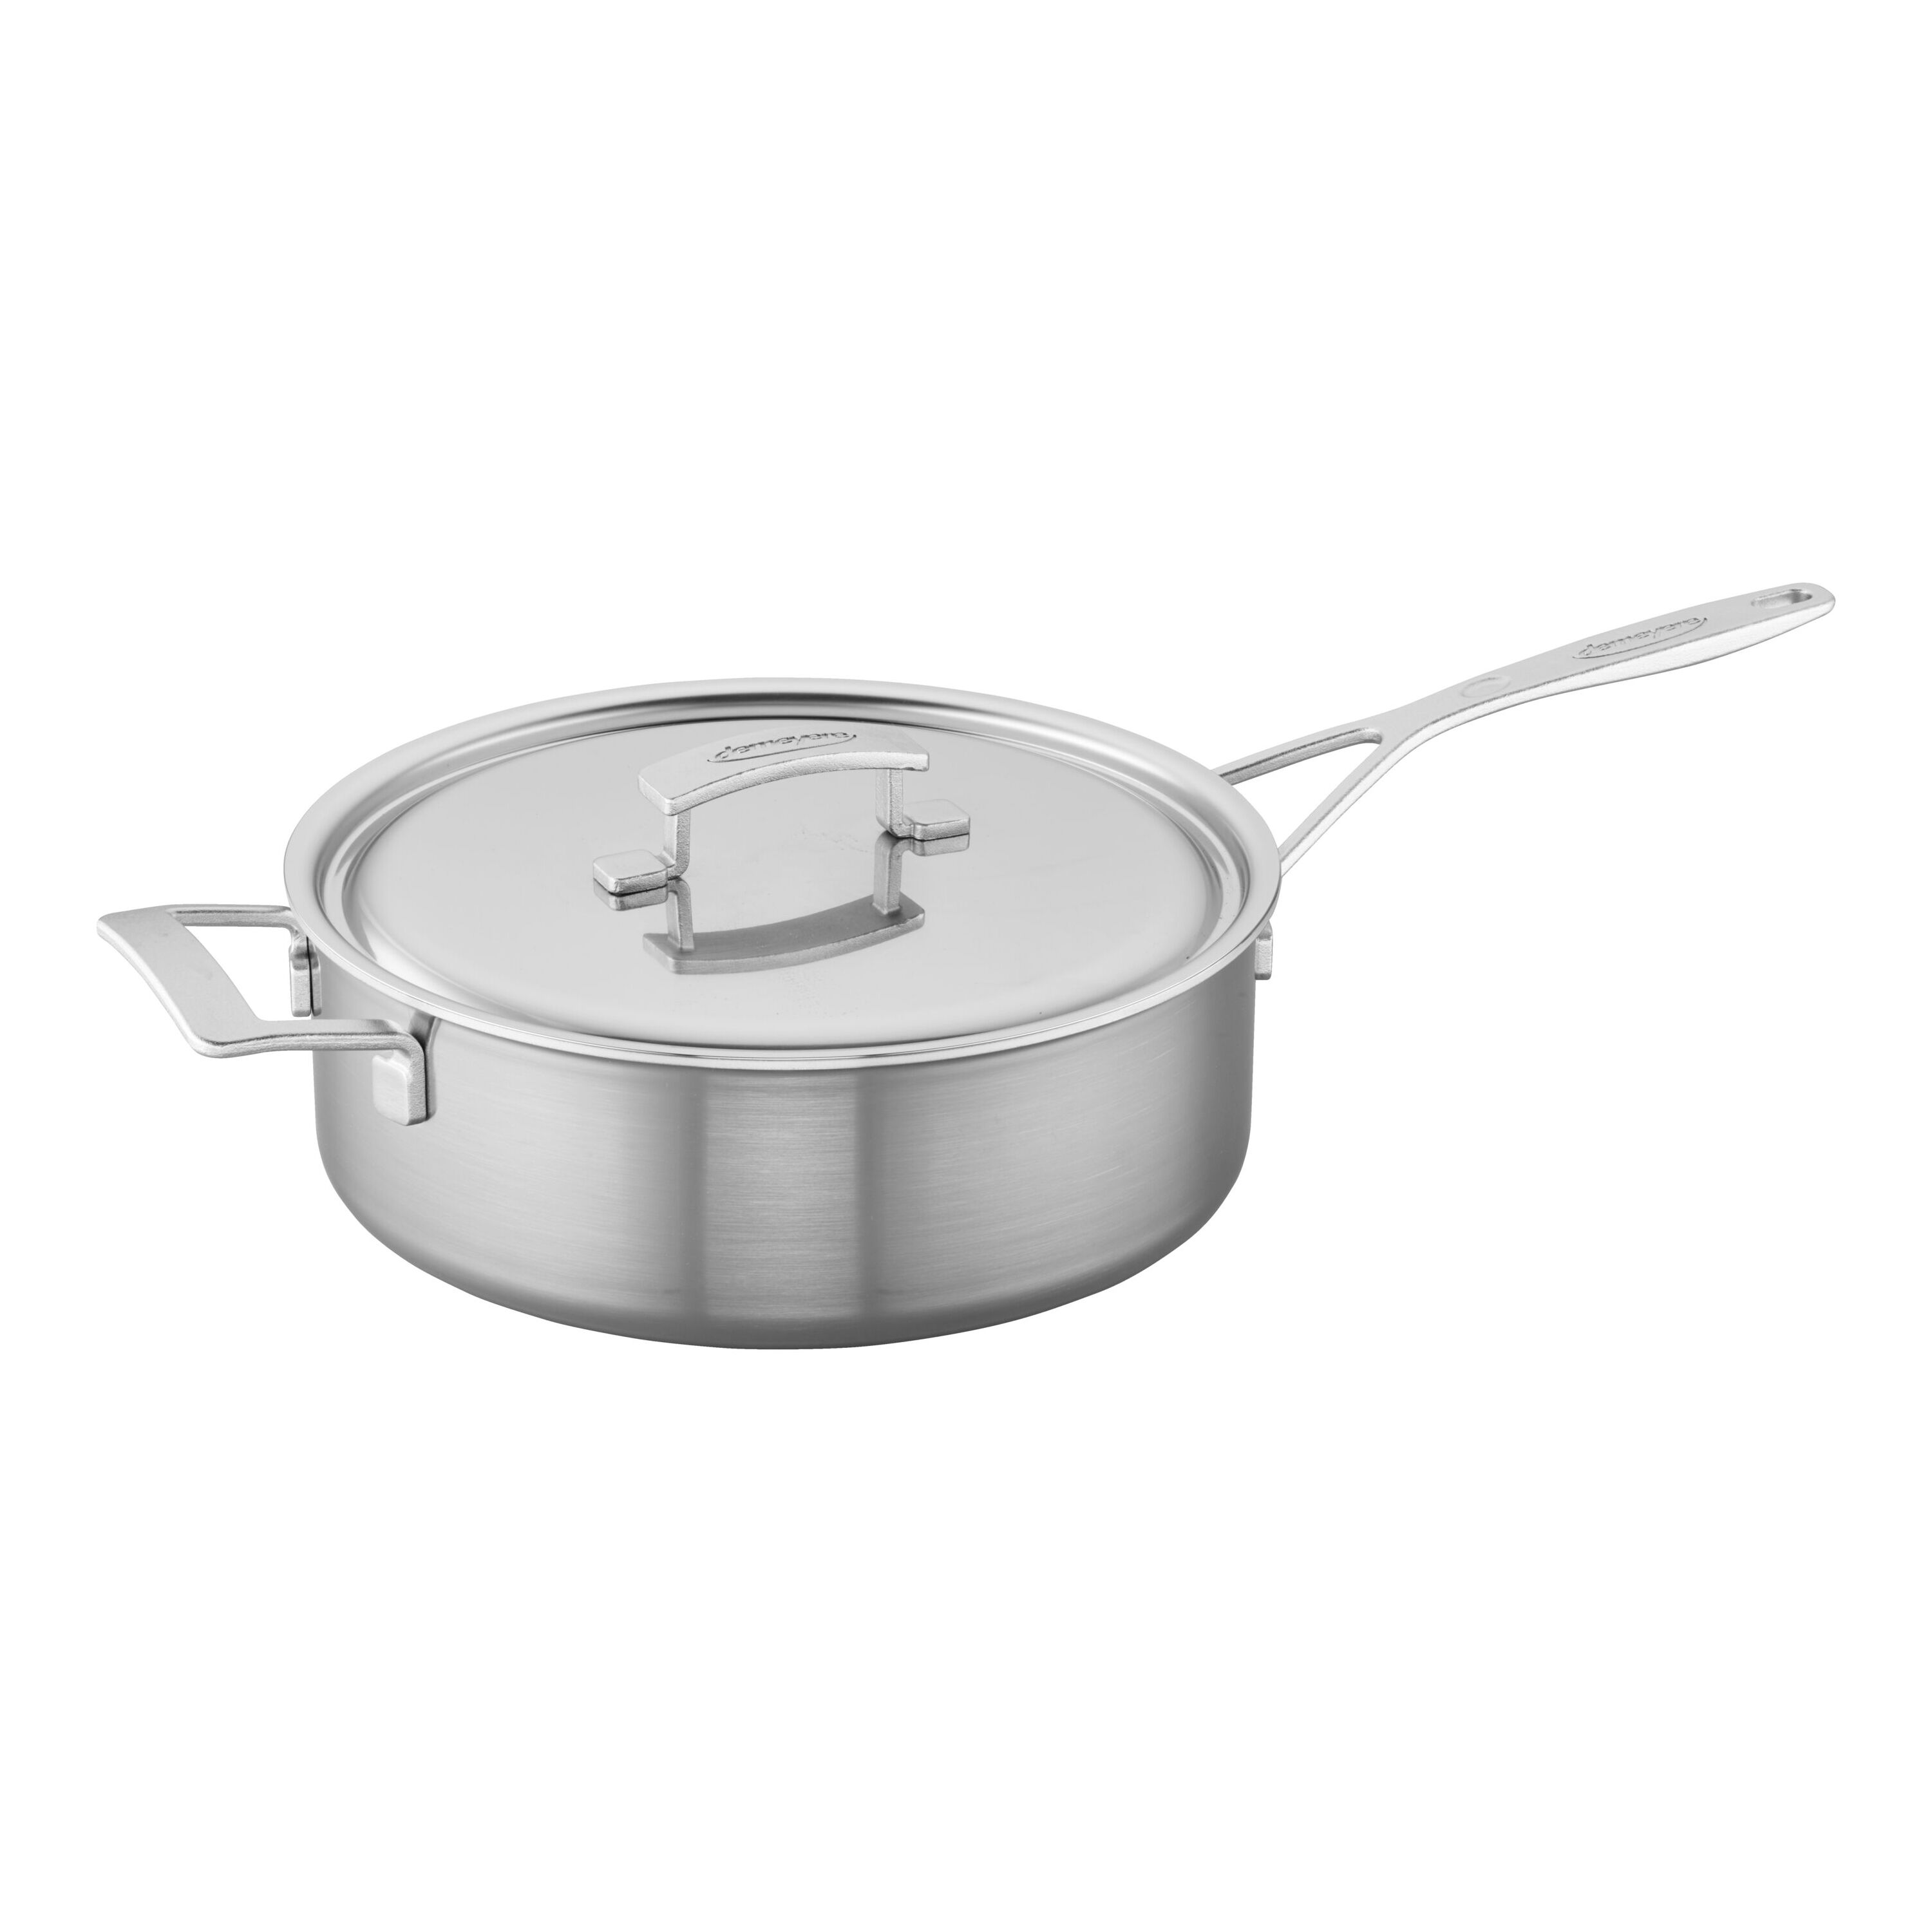 What is a Sauteuse Pan?